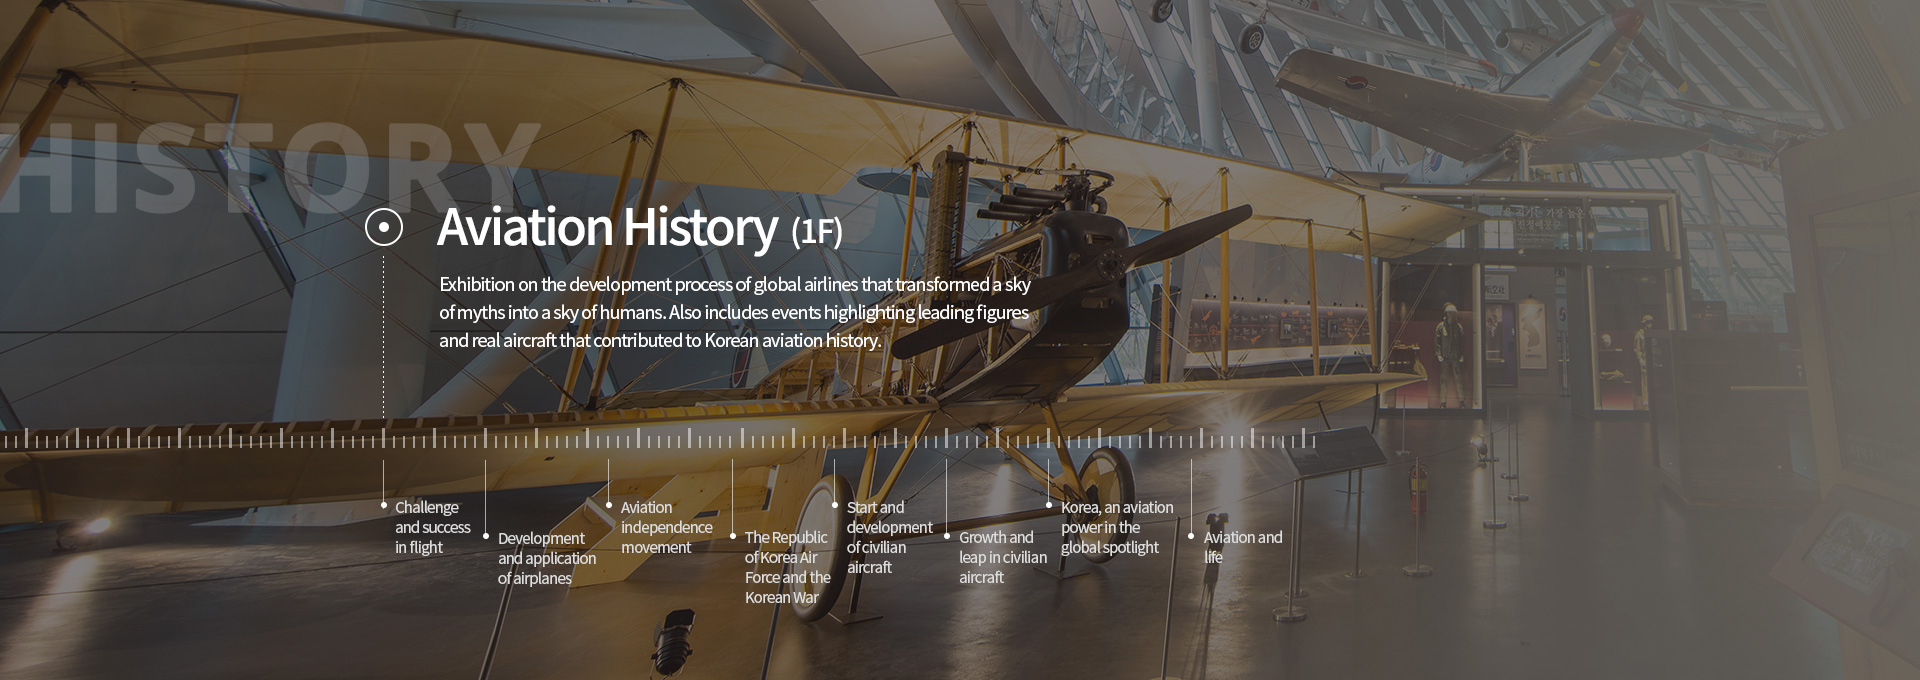 aviation history(Exhibition on the development process of global airlines that transformed a sky of myths into a sky of humans. Also includes events highlighting leading figures and real aircraft that contributed to Korean aviation history.)